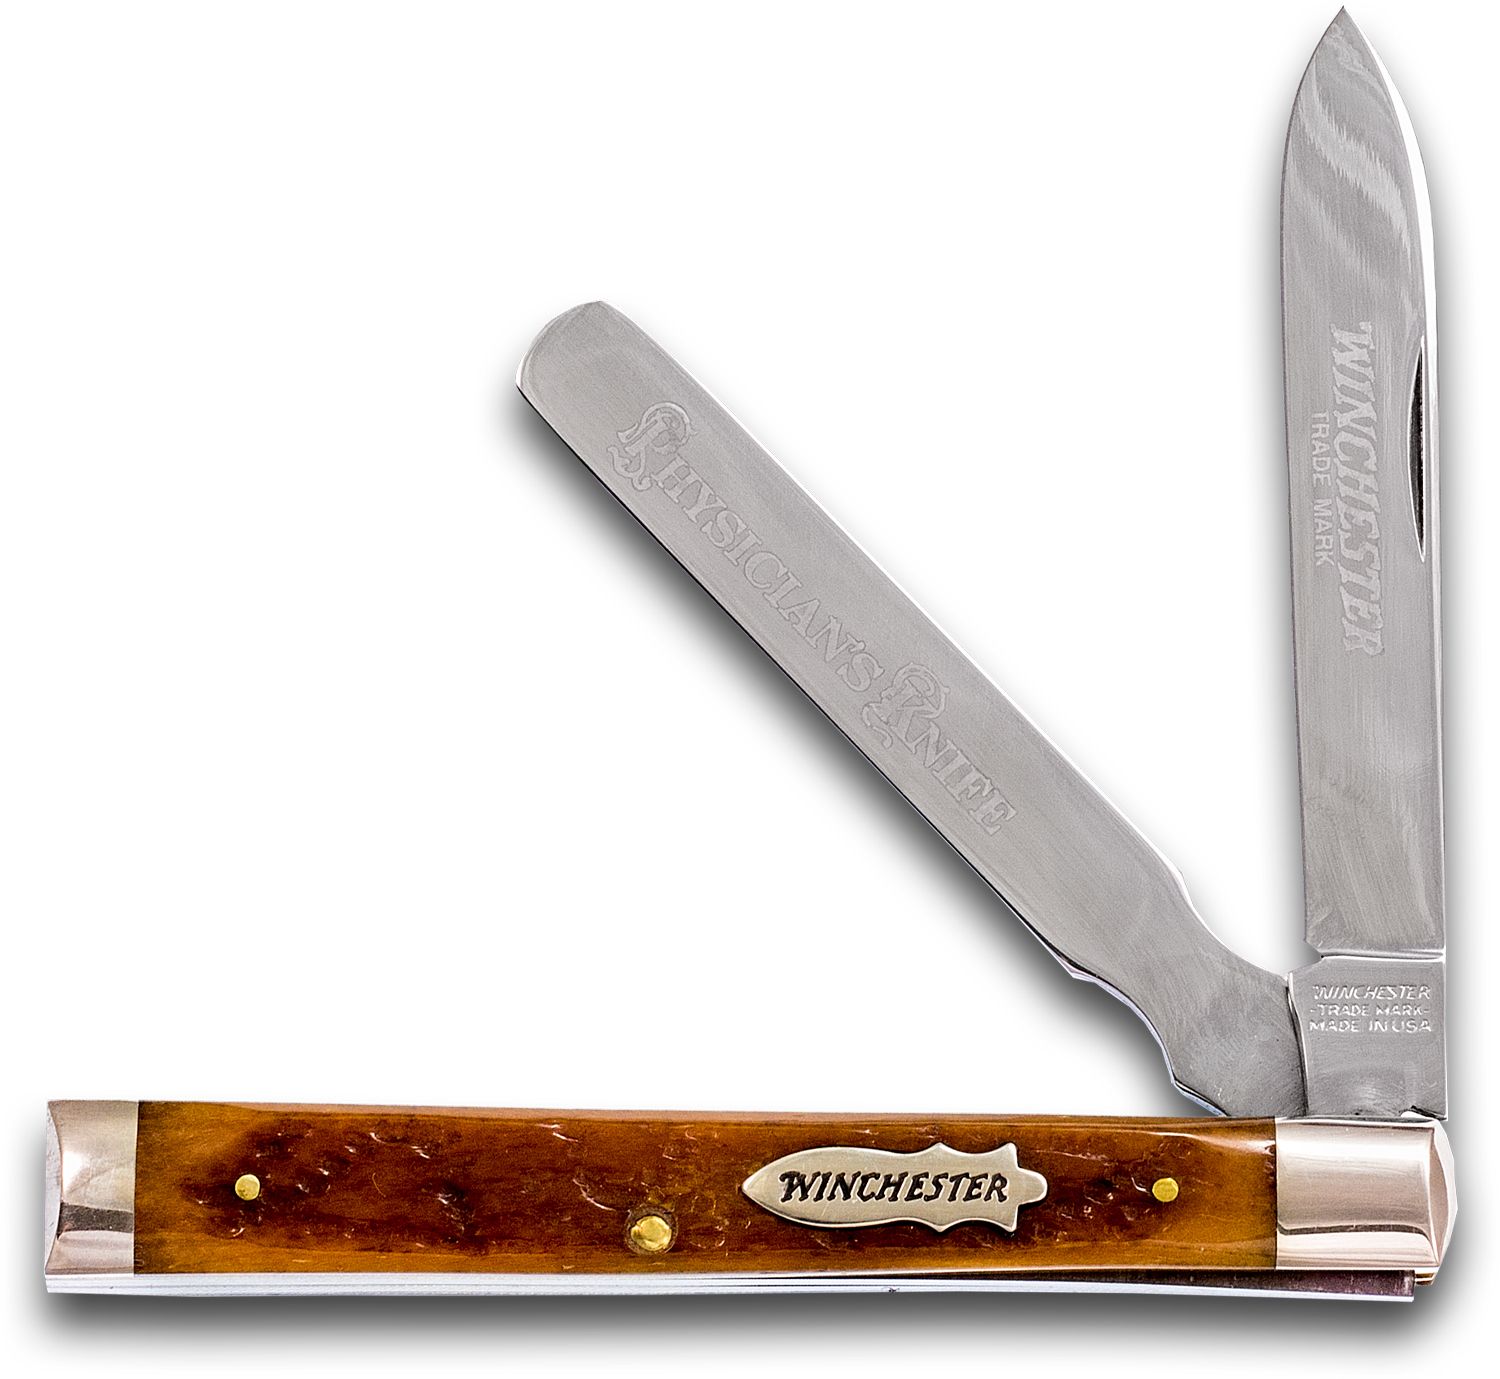 Winchester Two Blade Doctor's Knife, Tan Bone Handles, 3.625 Closed -  KnifeCenter - W 18 29082 T - Discontinued